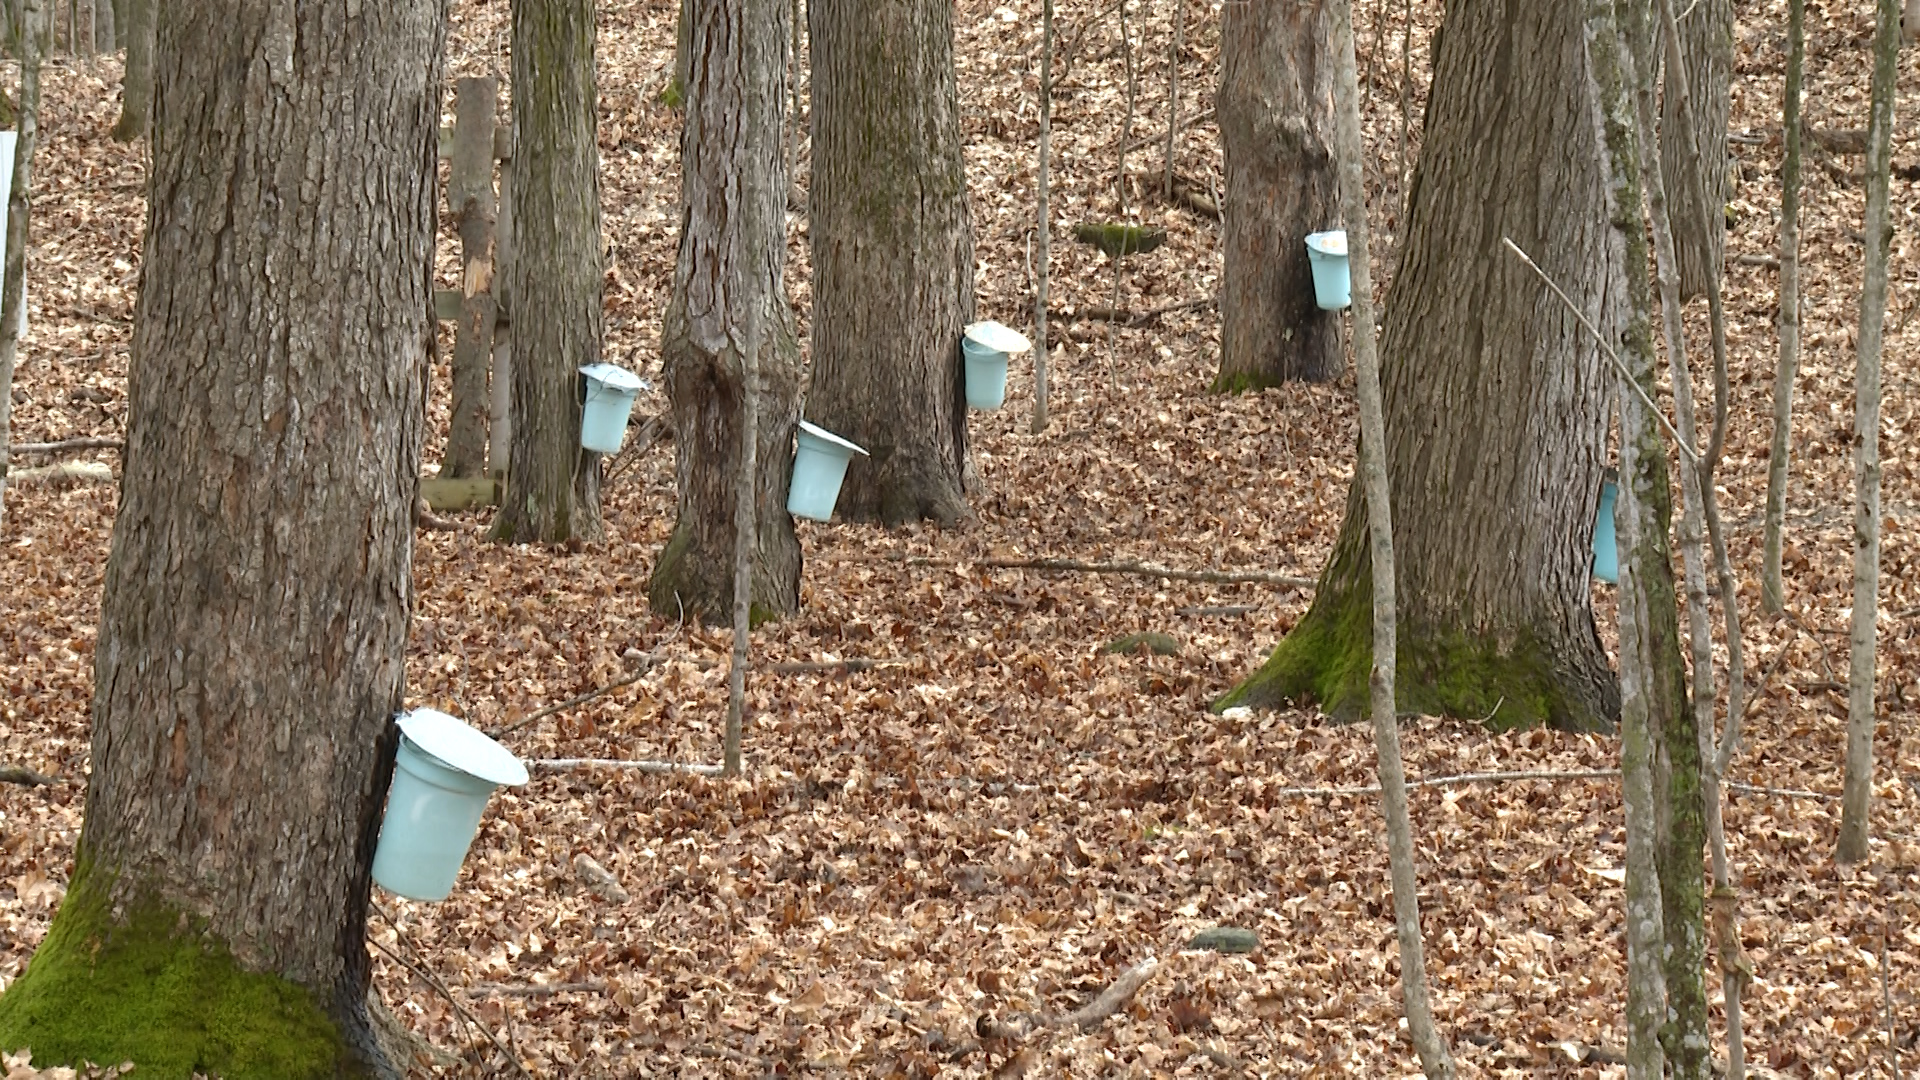 Maple Madness returns for 41st year